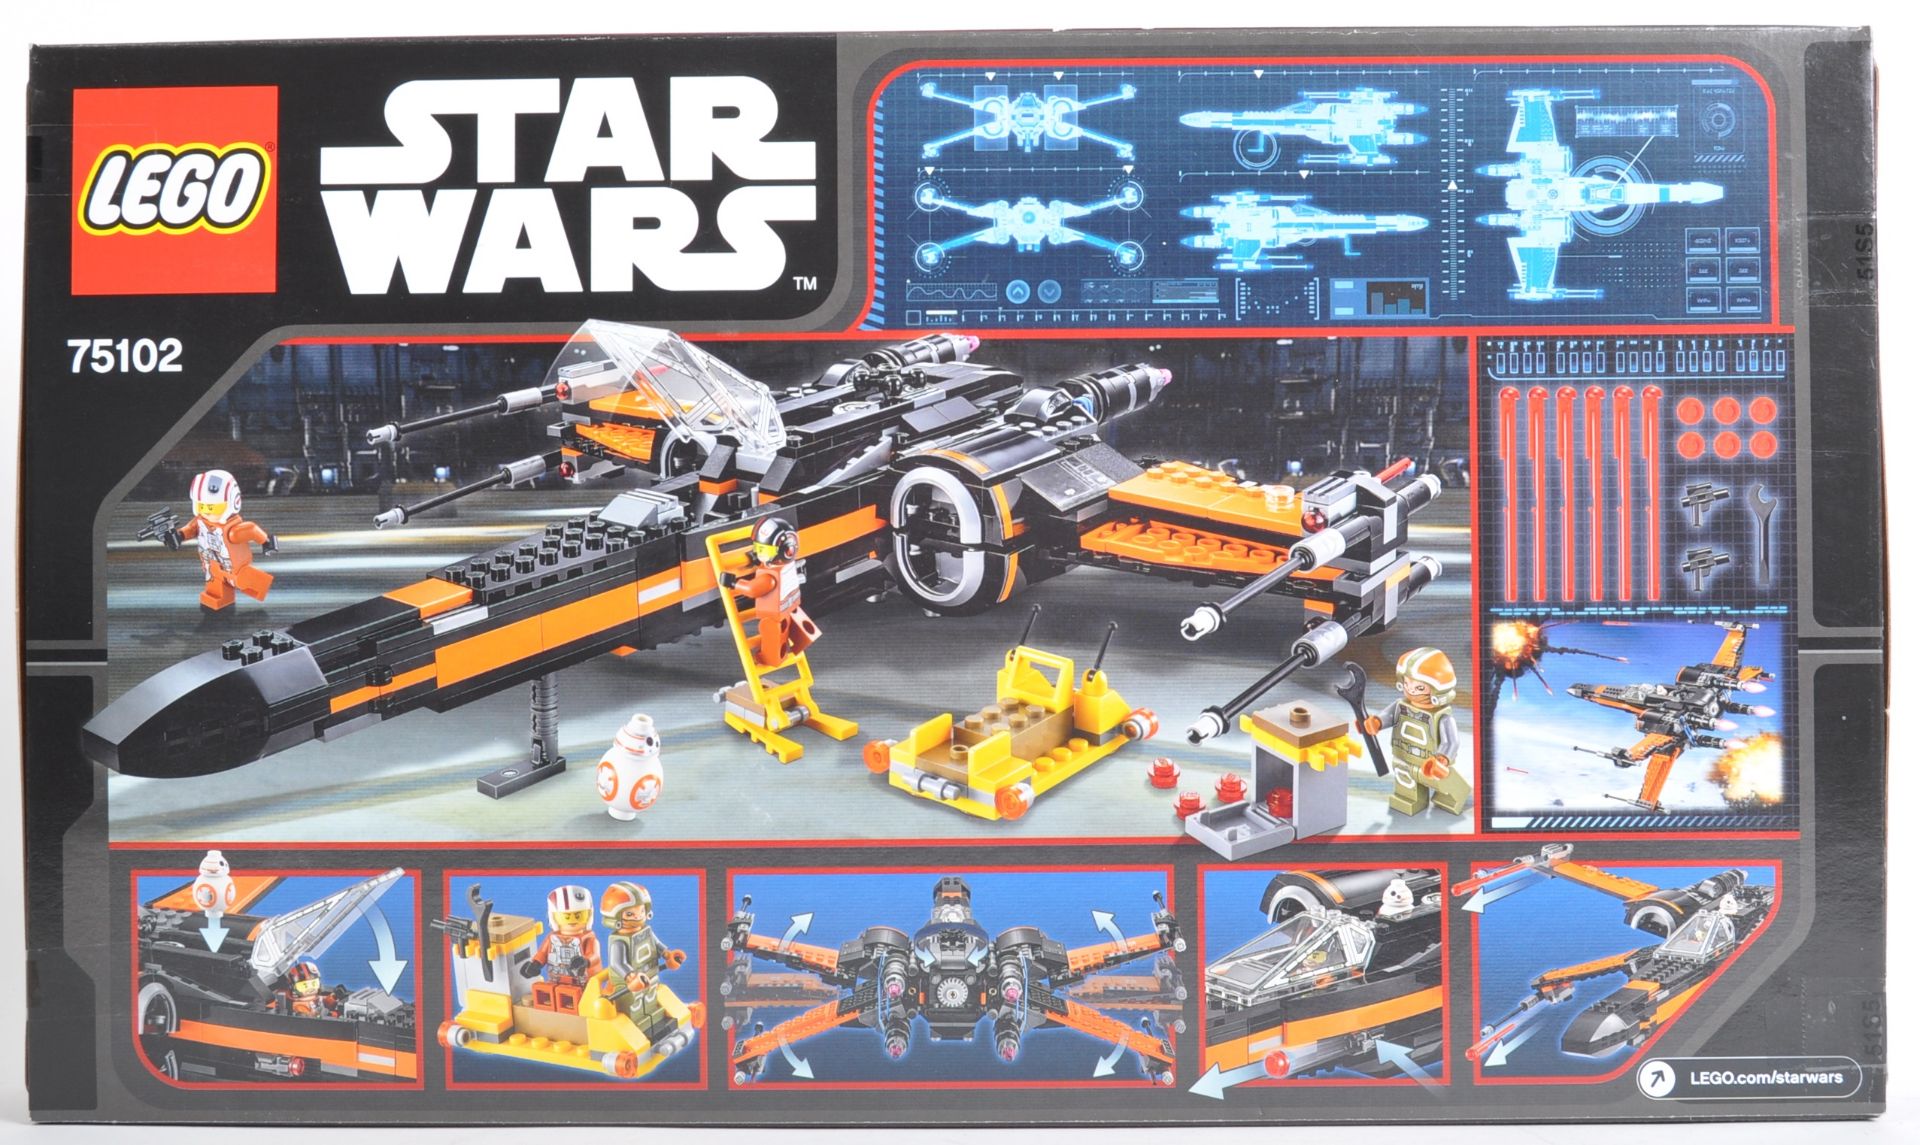 LEGO SET - LEGO STAR WARS - 75102 - POE'S X-WING FIGHTER - Image 2 of 4